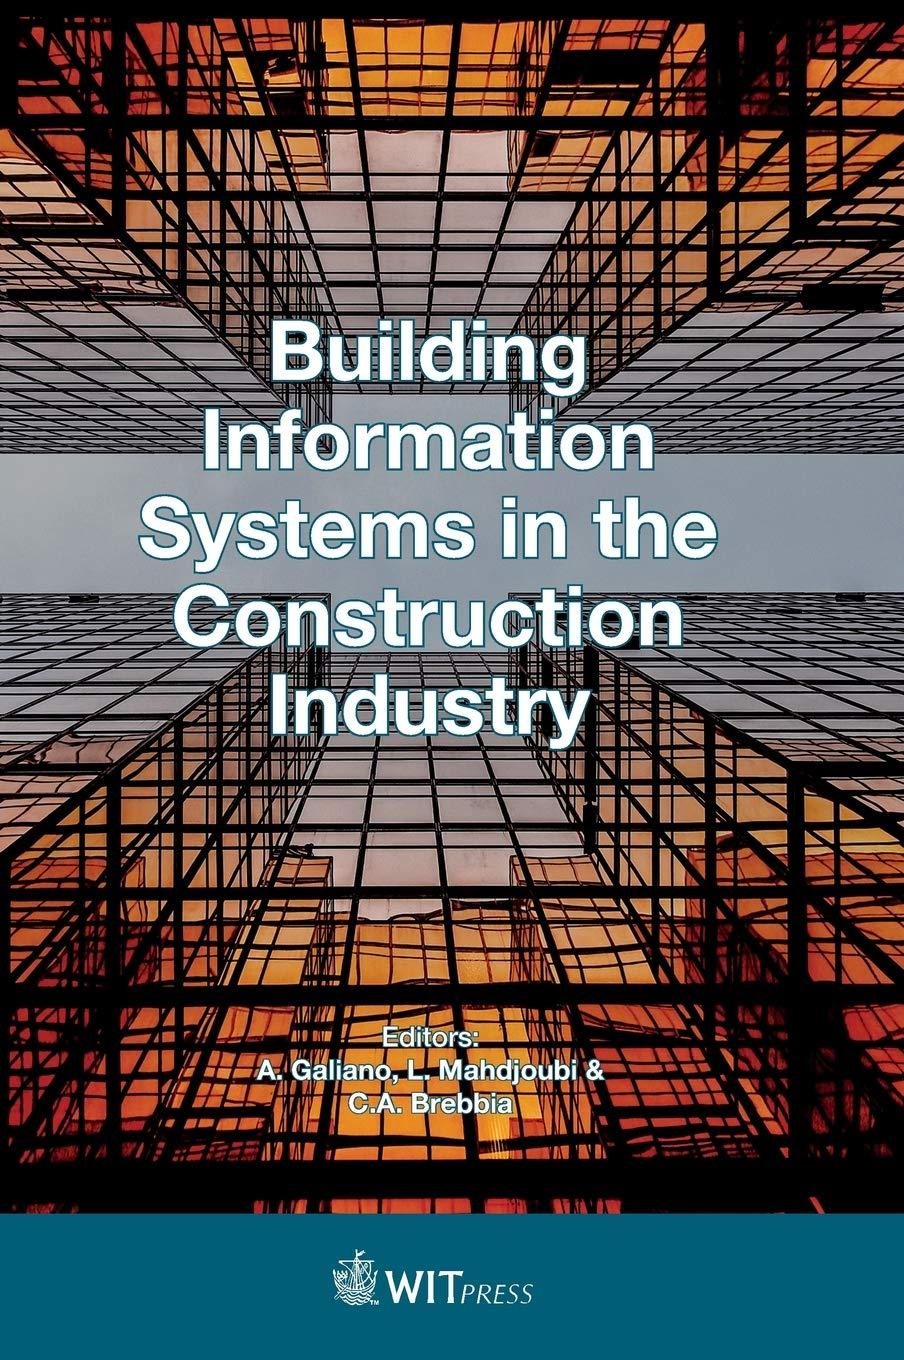 building information systems in the construction industry 1st edition a. galiano garrigos, l. mahdjoubi, c.